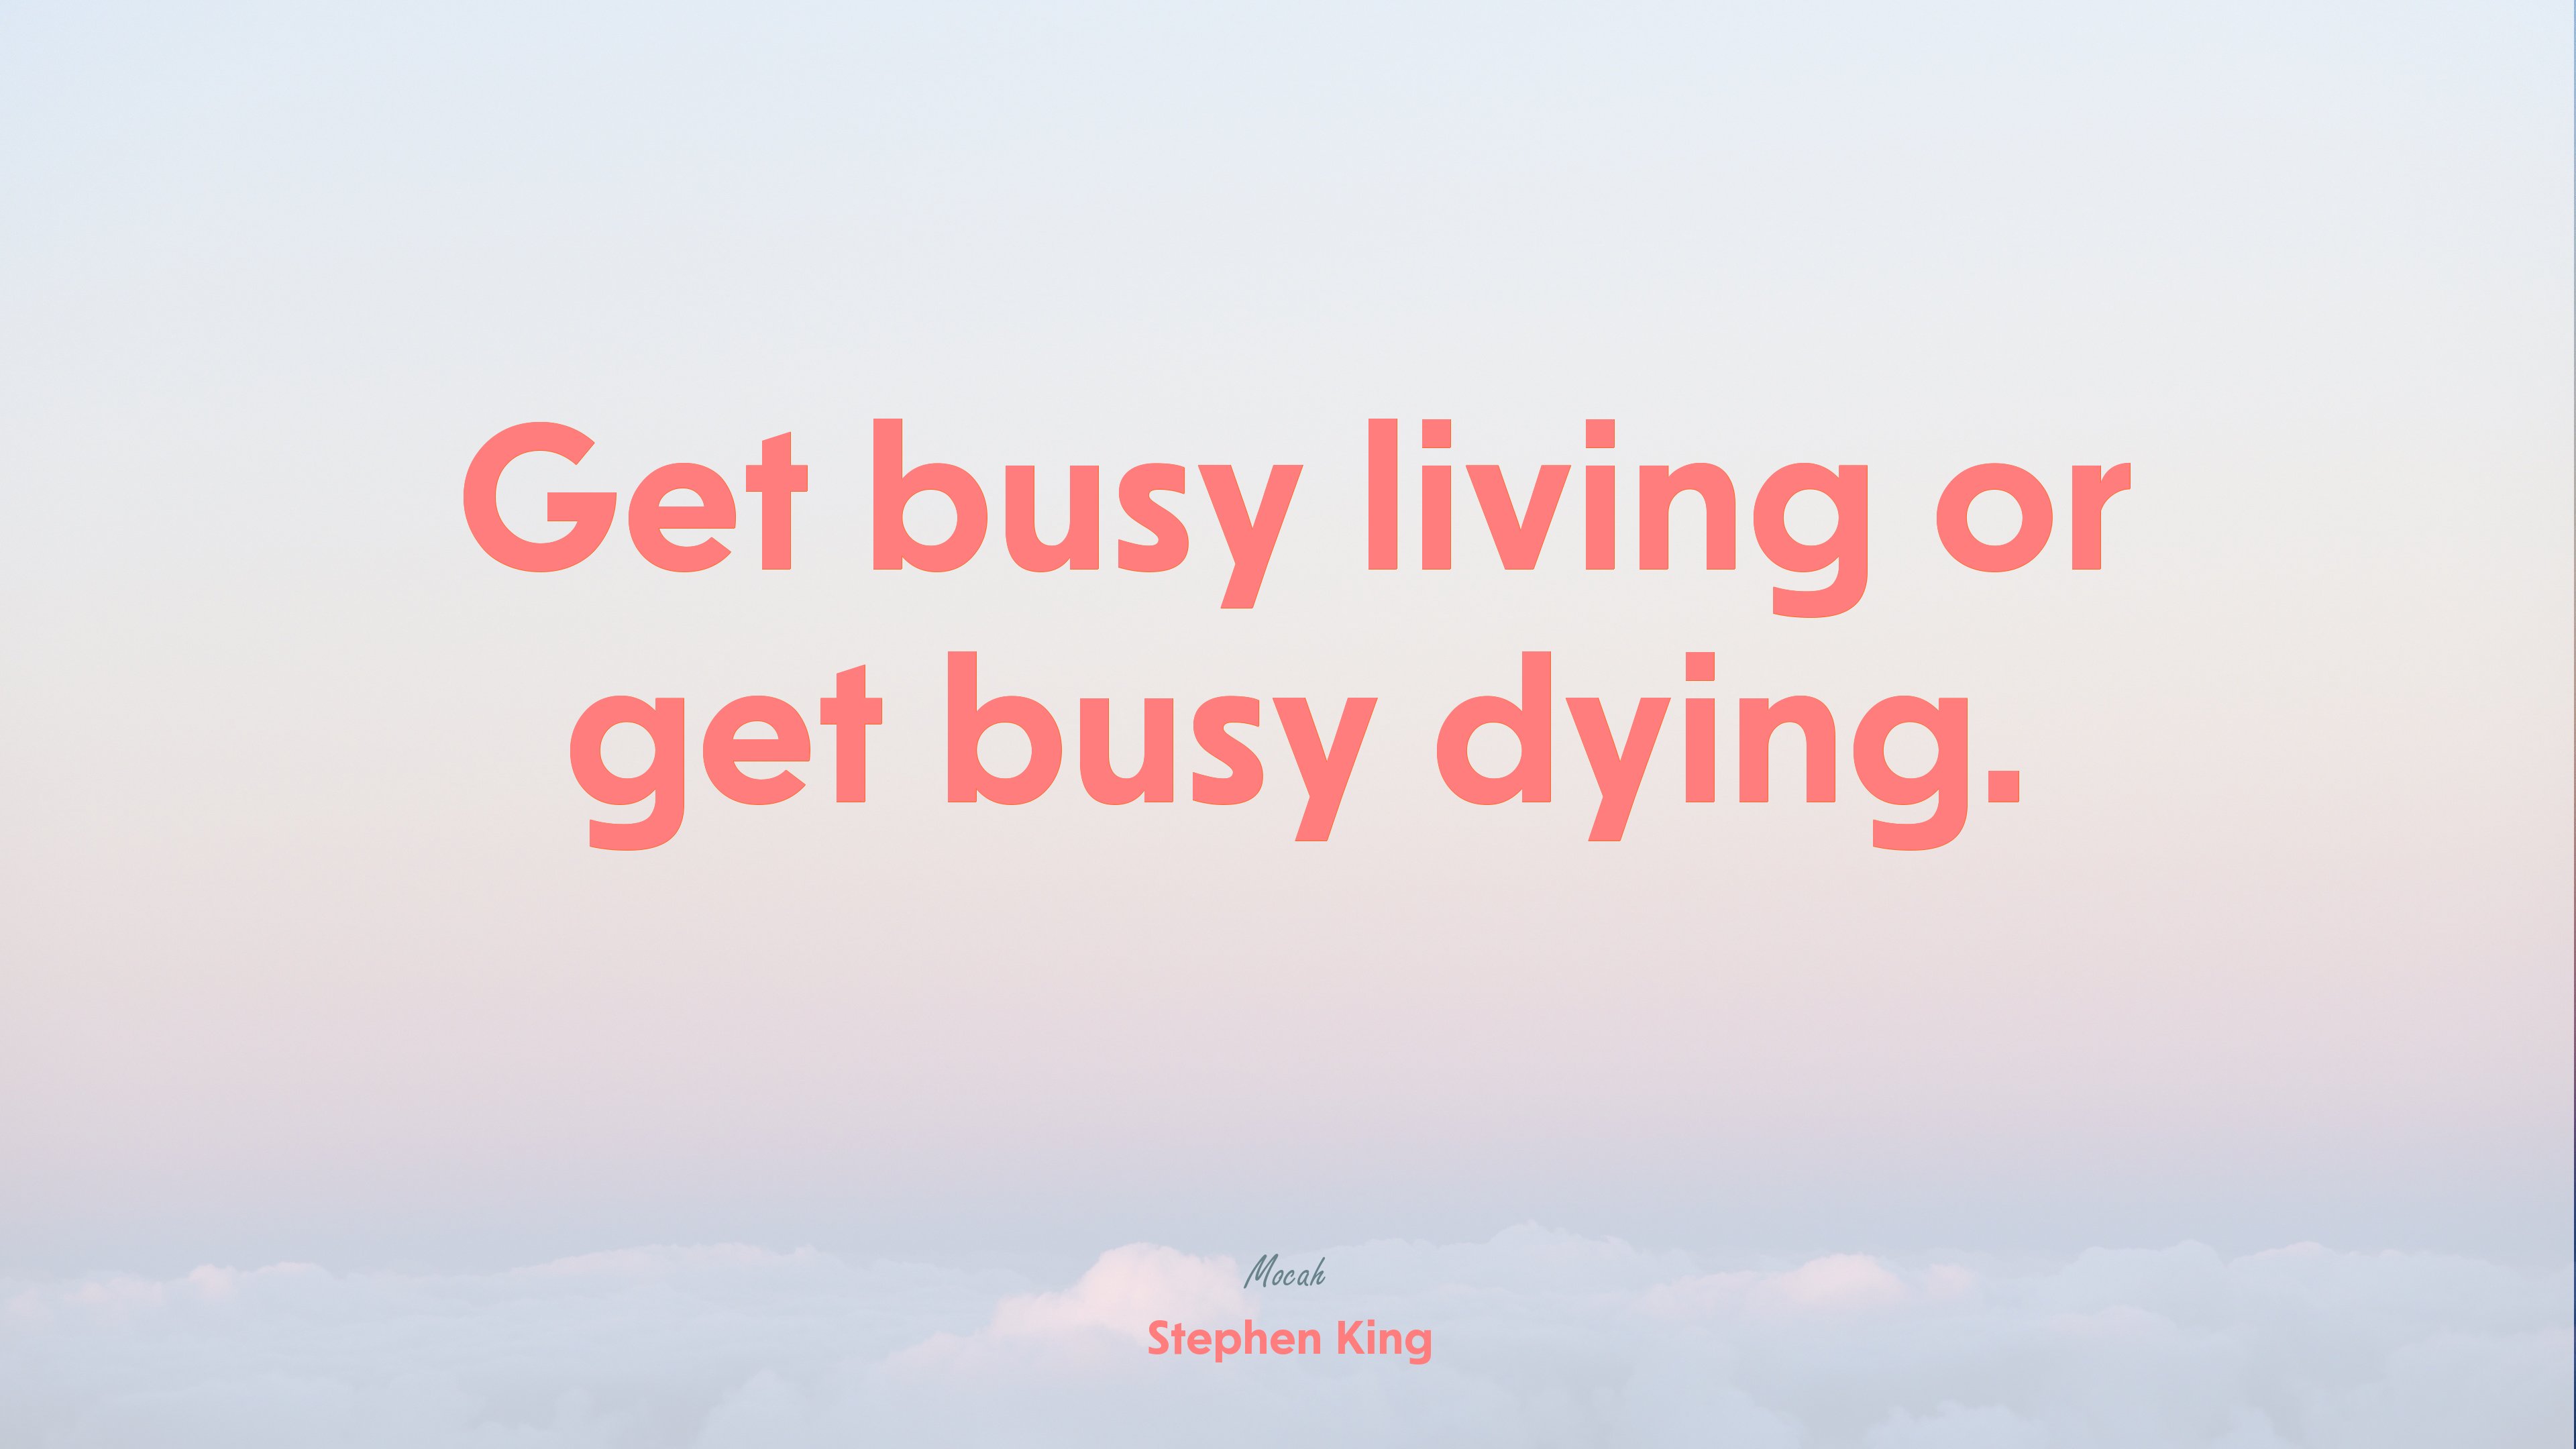 quote on life wallpaper for desktop, Stephen King quote Gallery HD Wallpaper